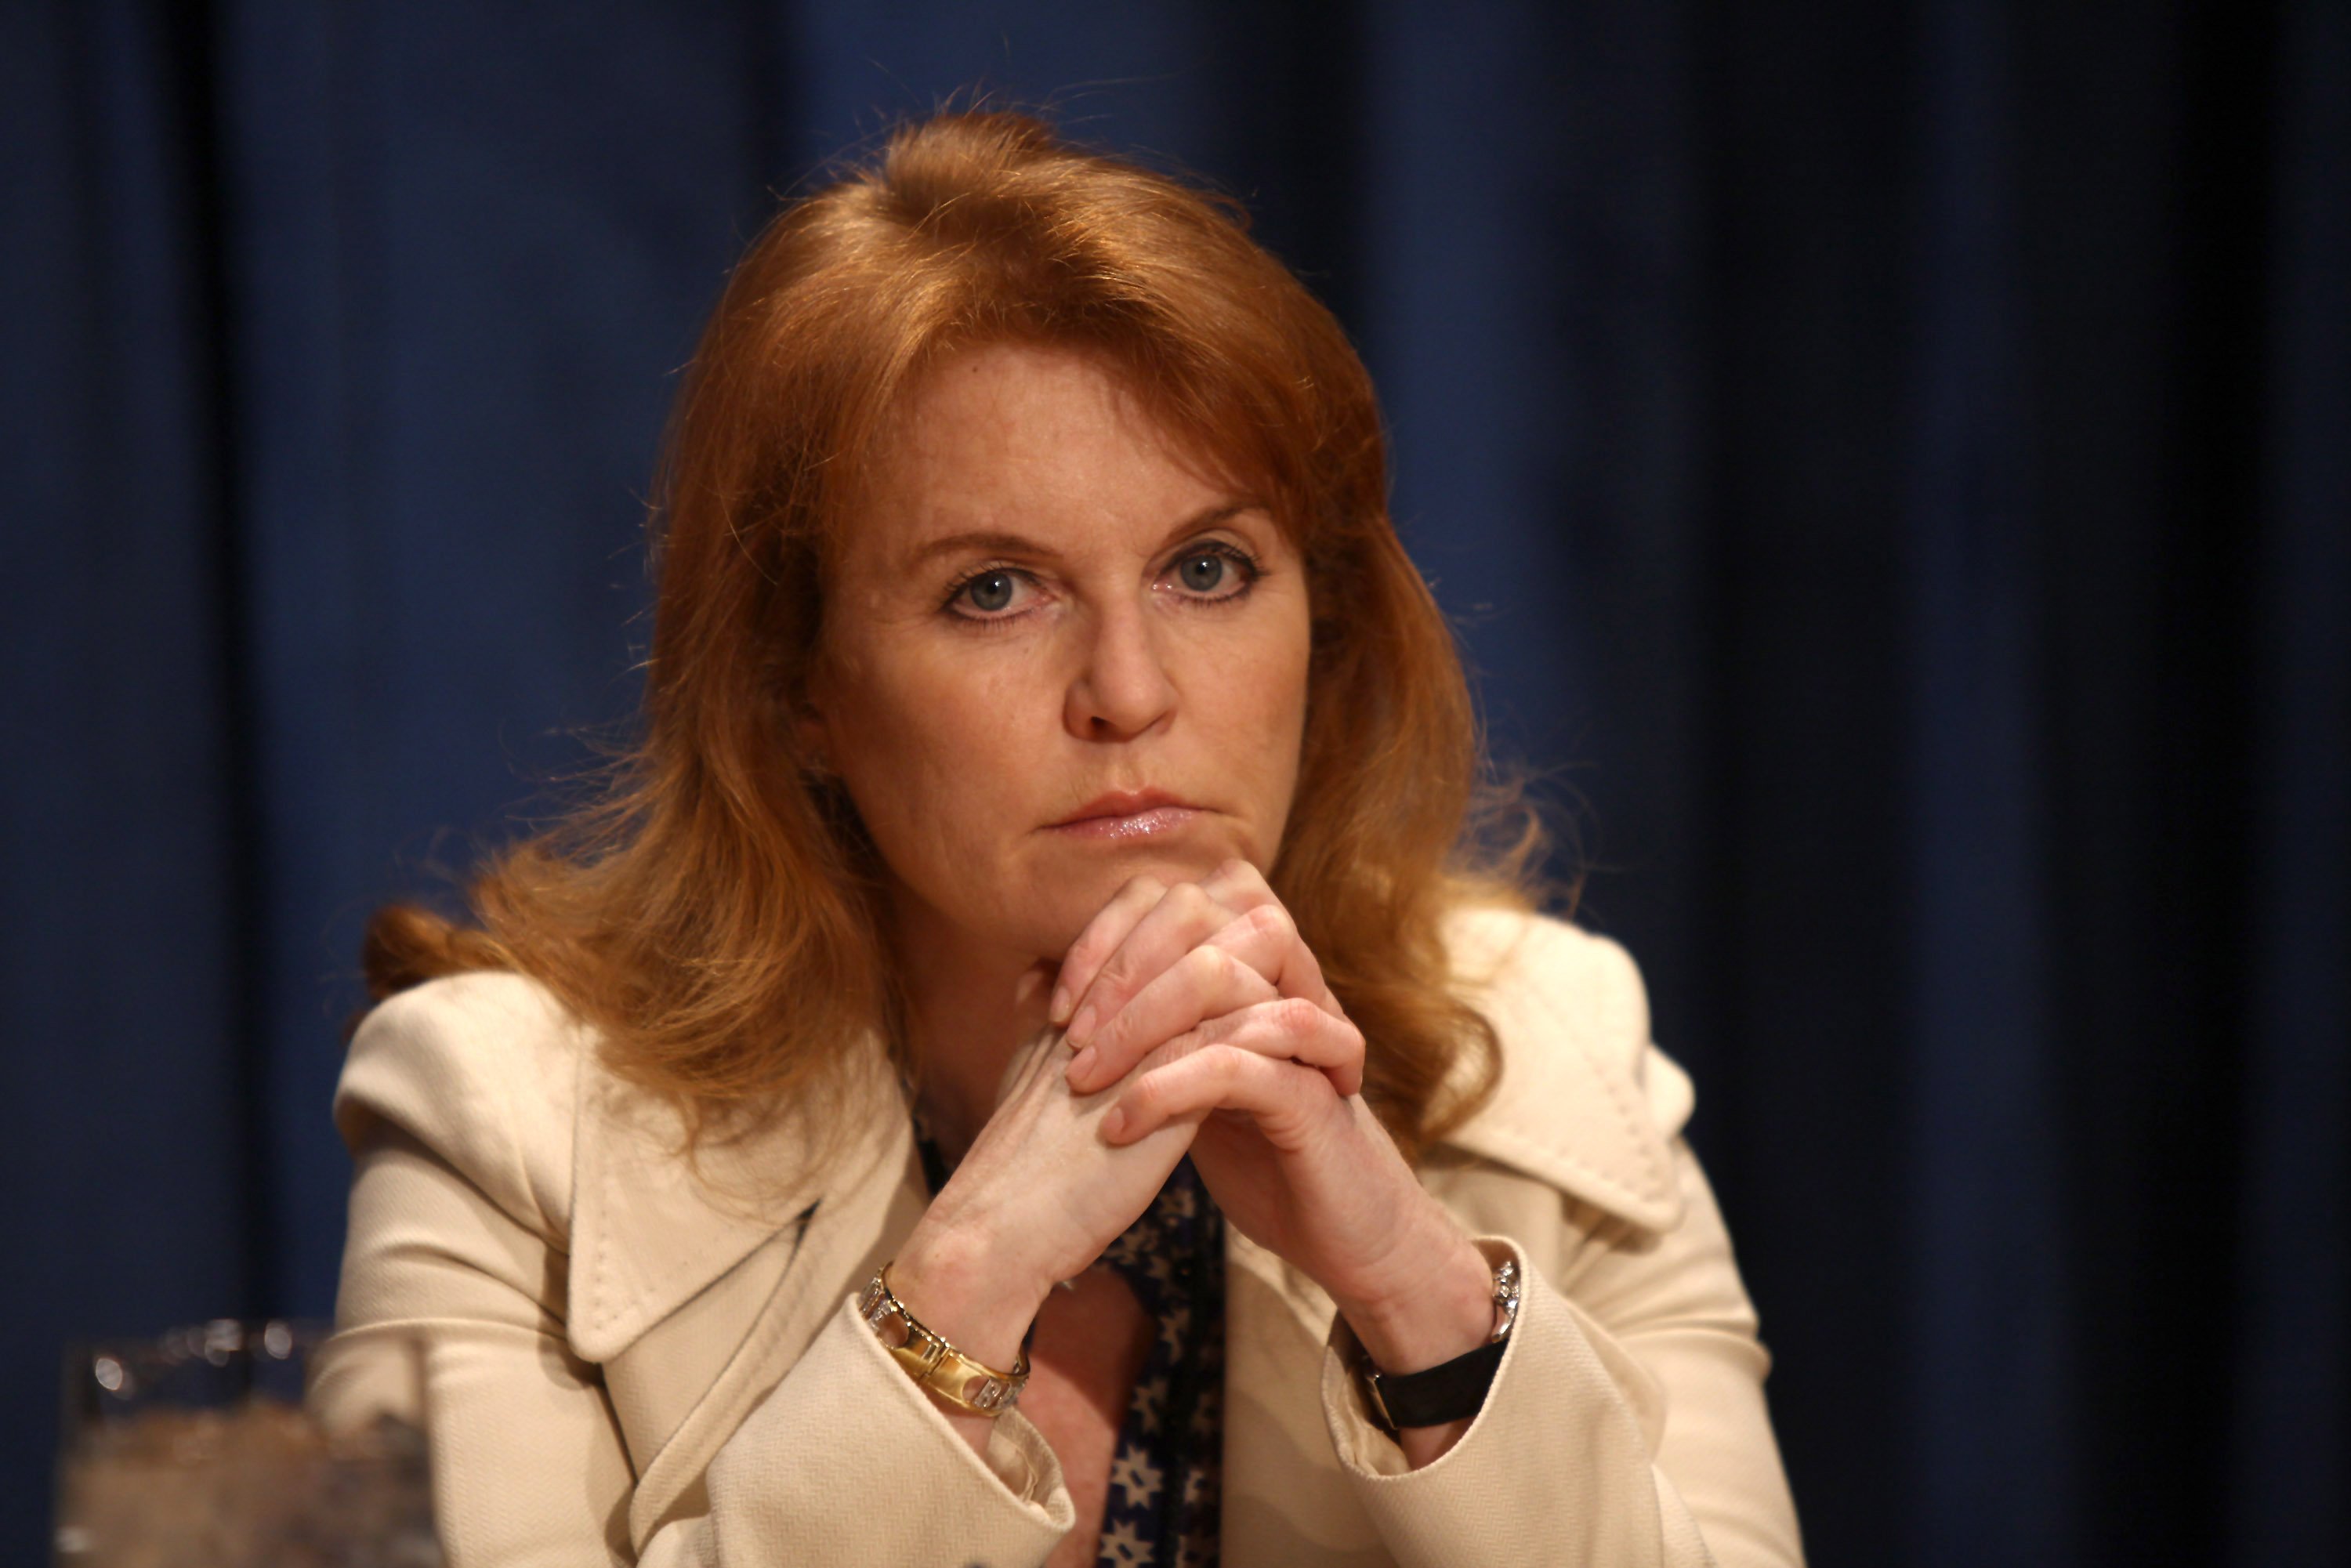  Duchess of York Sarah Ferguson attends the "Engaging philanthropy to promote gender equality and women's empowerment" event at the United Nations on February 22, 2010 in New York City | Source: Getty Images